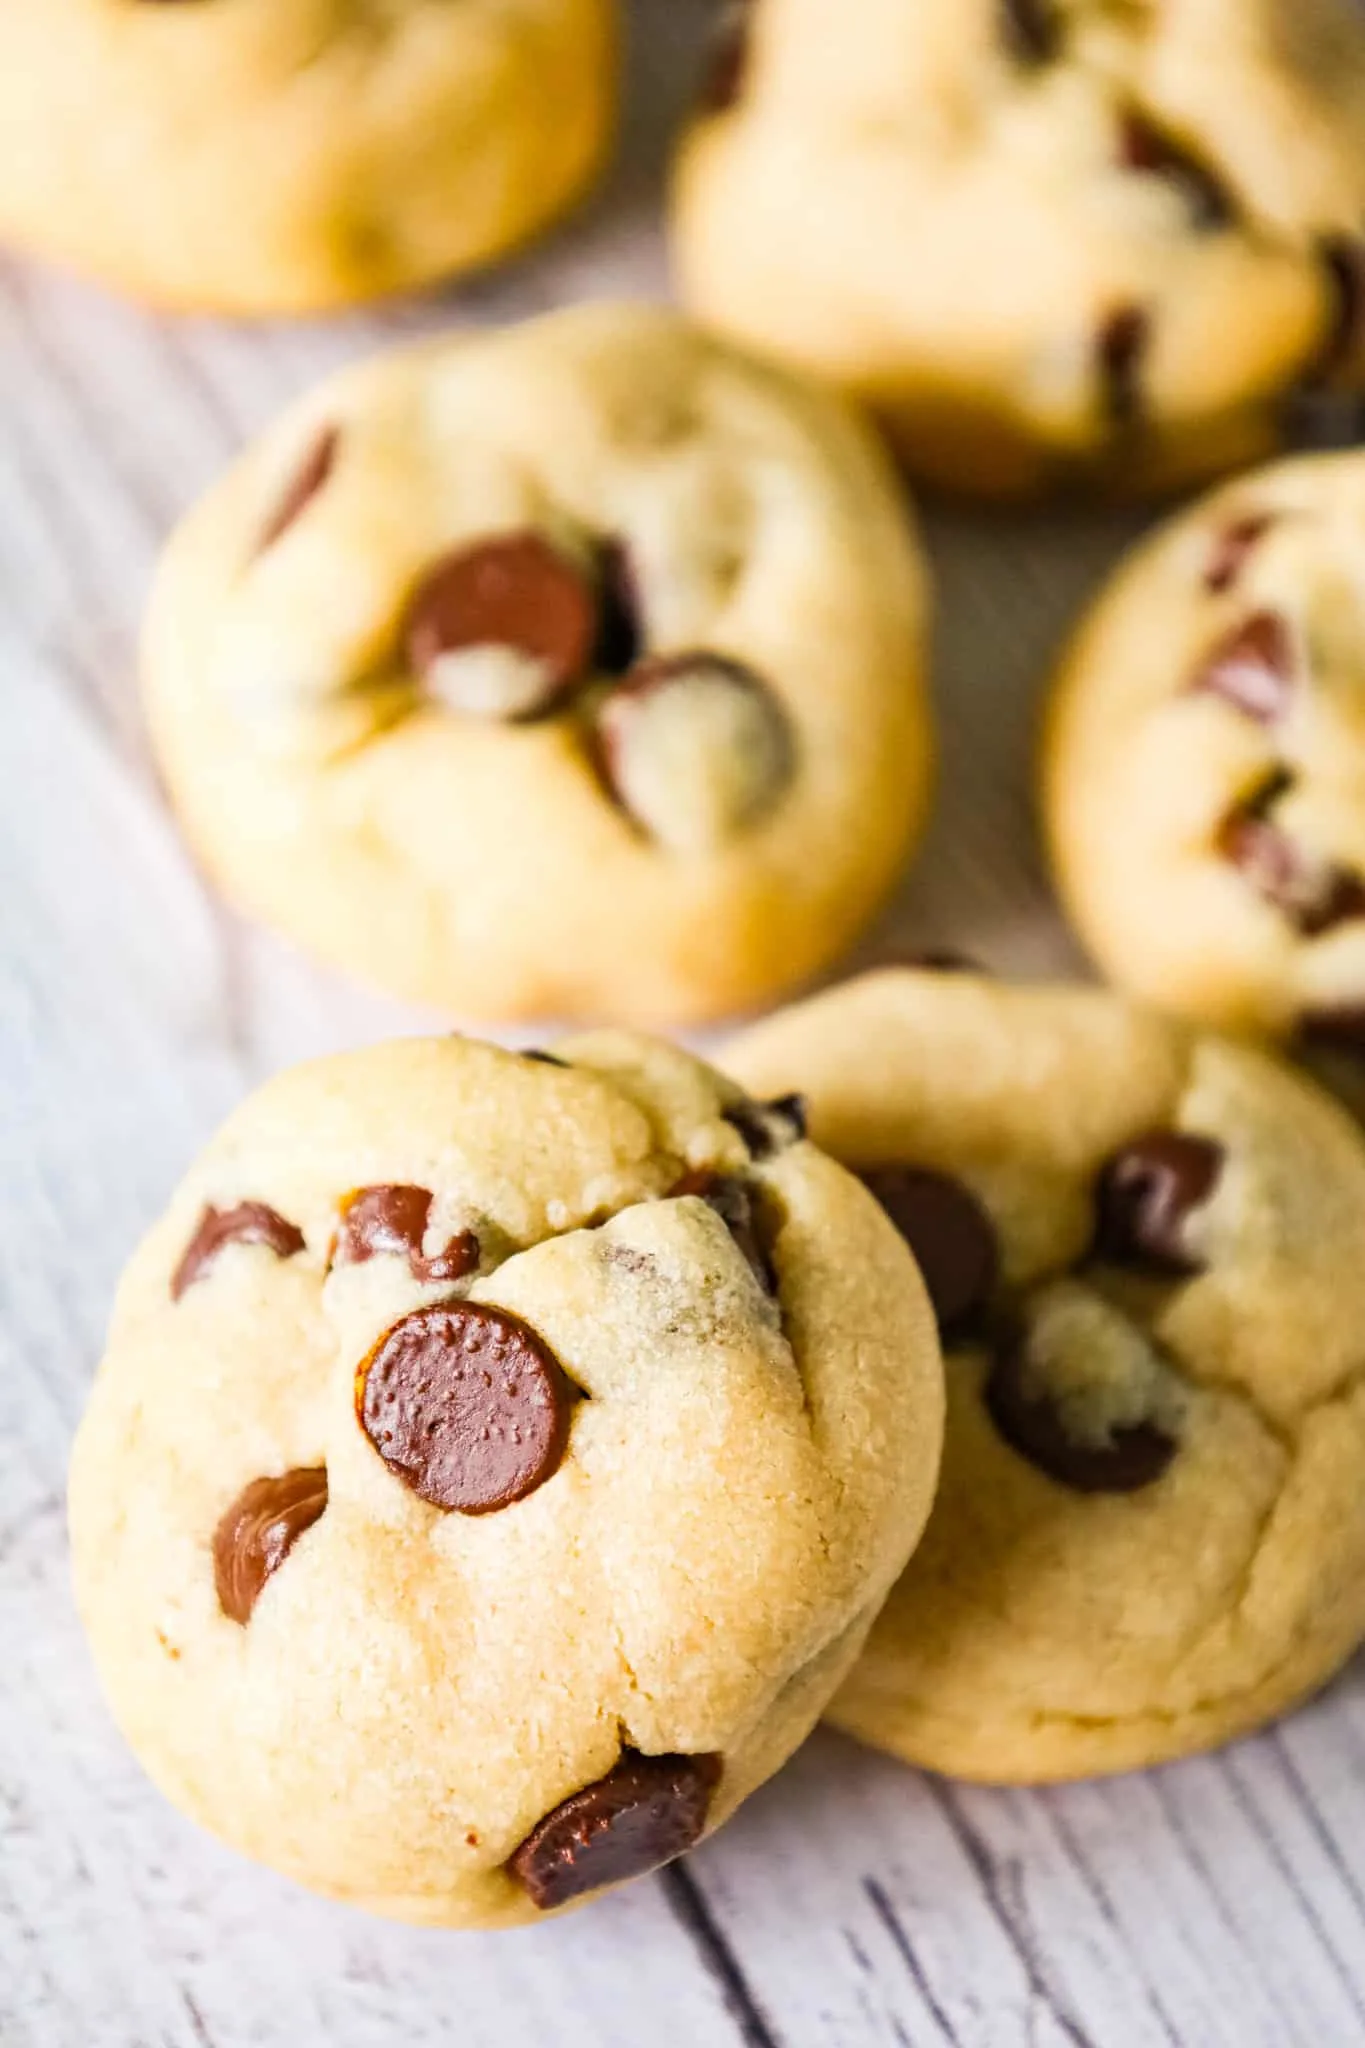 Chocolate Chip Pudding Cookies are soft and chewy cookies made with vanilla instant pudding mix and loaded with semi sweet chocolate chips.